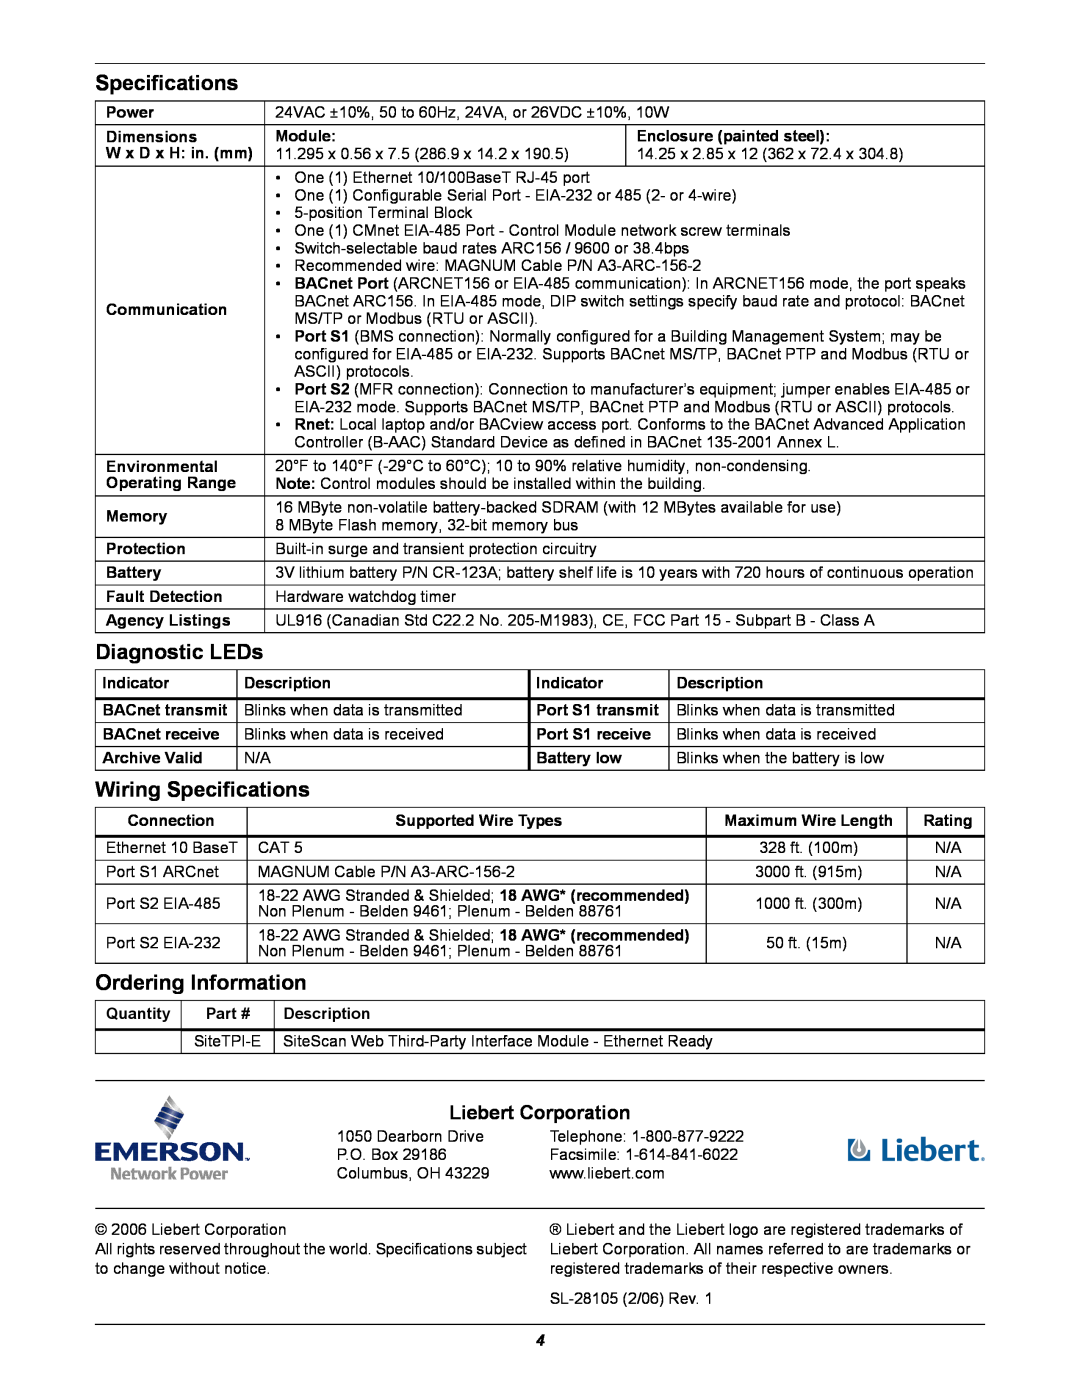 Emerson SITETPI-E V3 dimensions Diagnostic LEDs, Wiring Specifications, Ordering Information, Liebert Corporation 